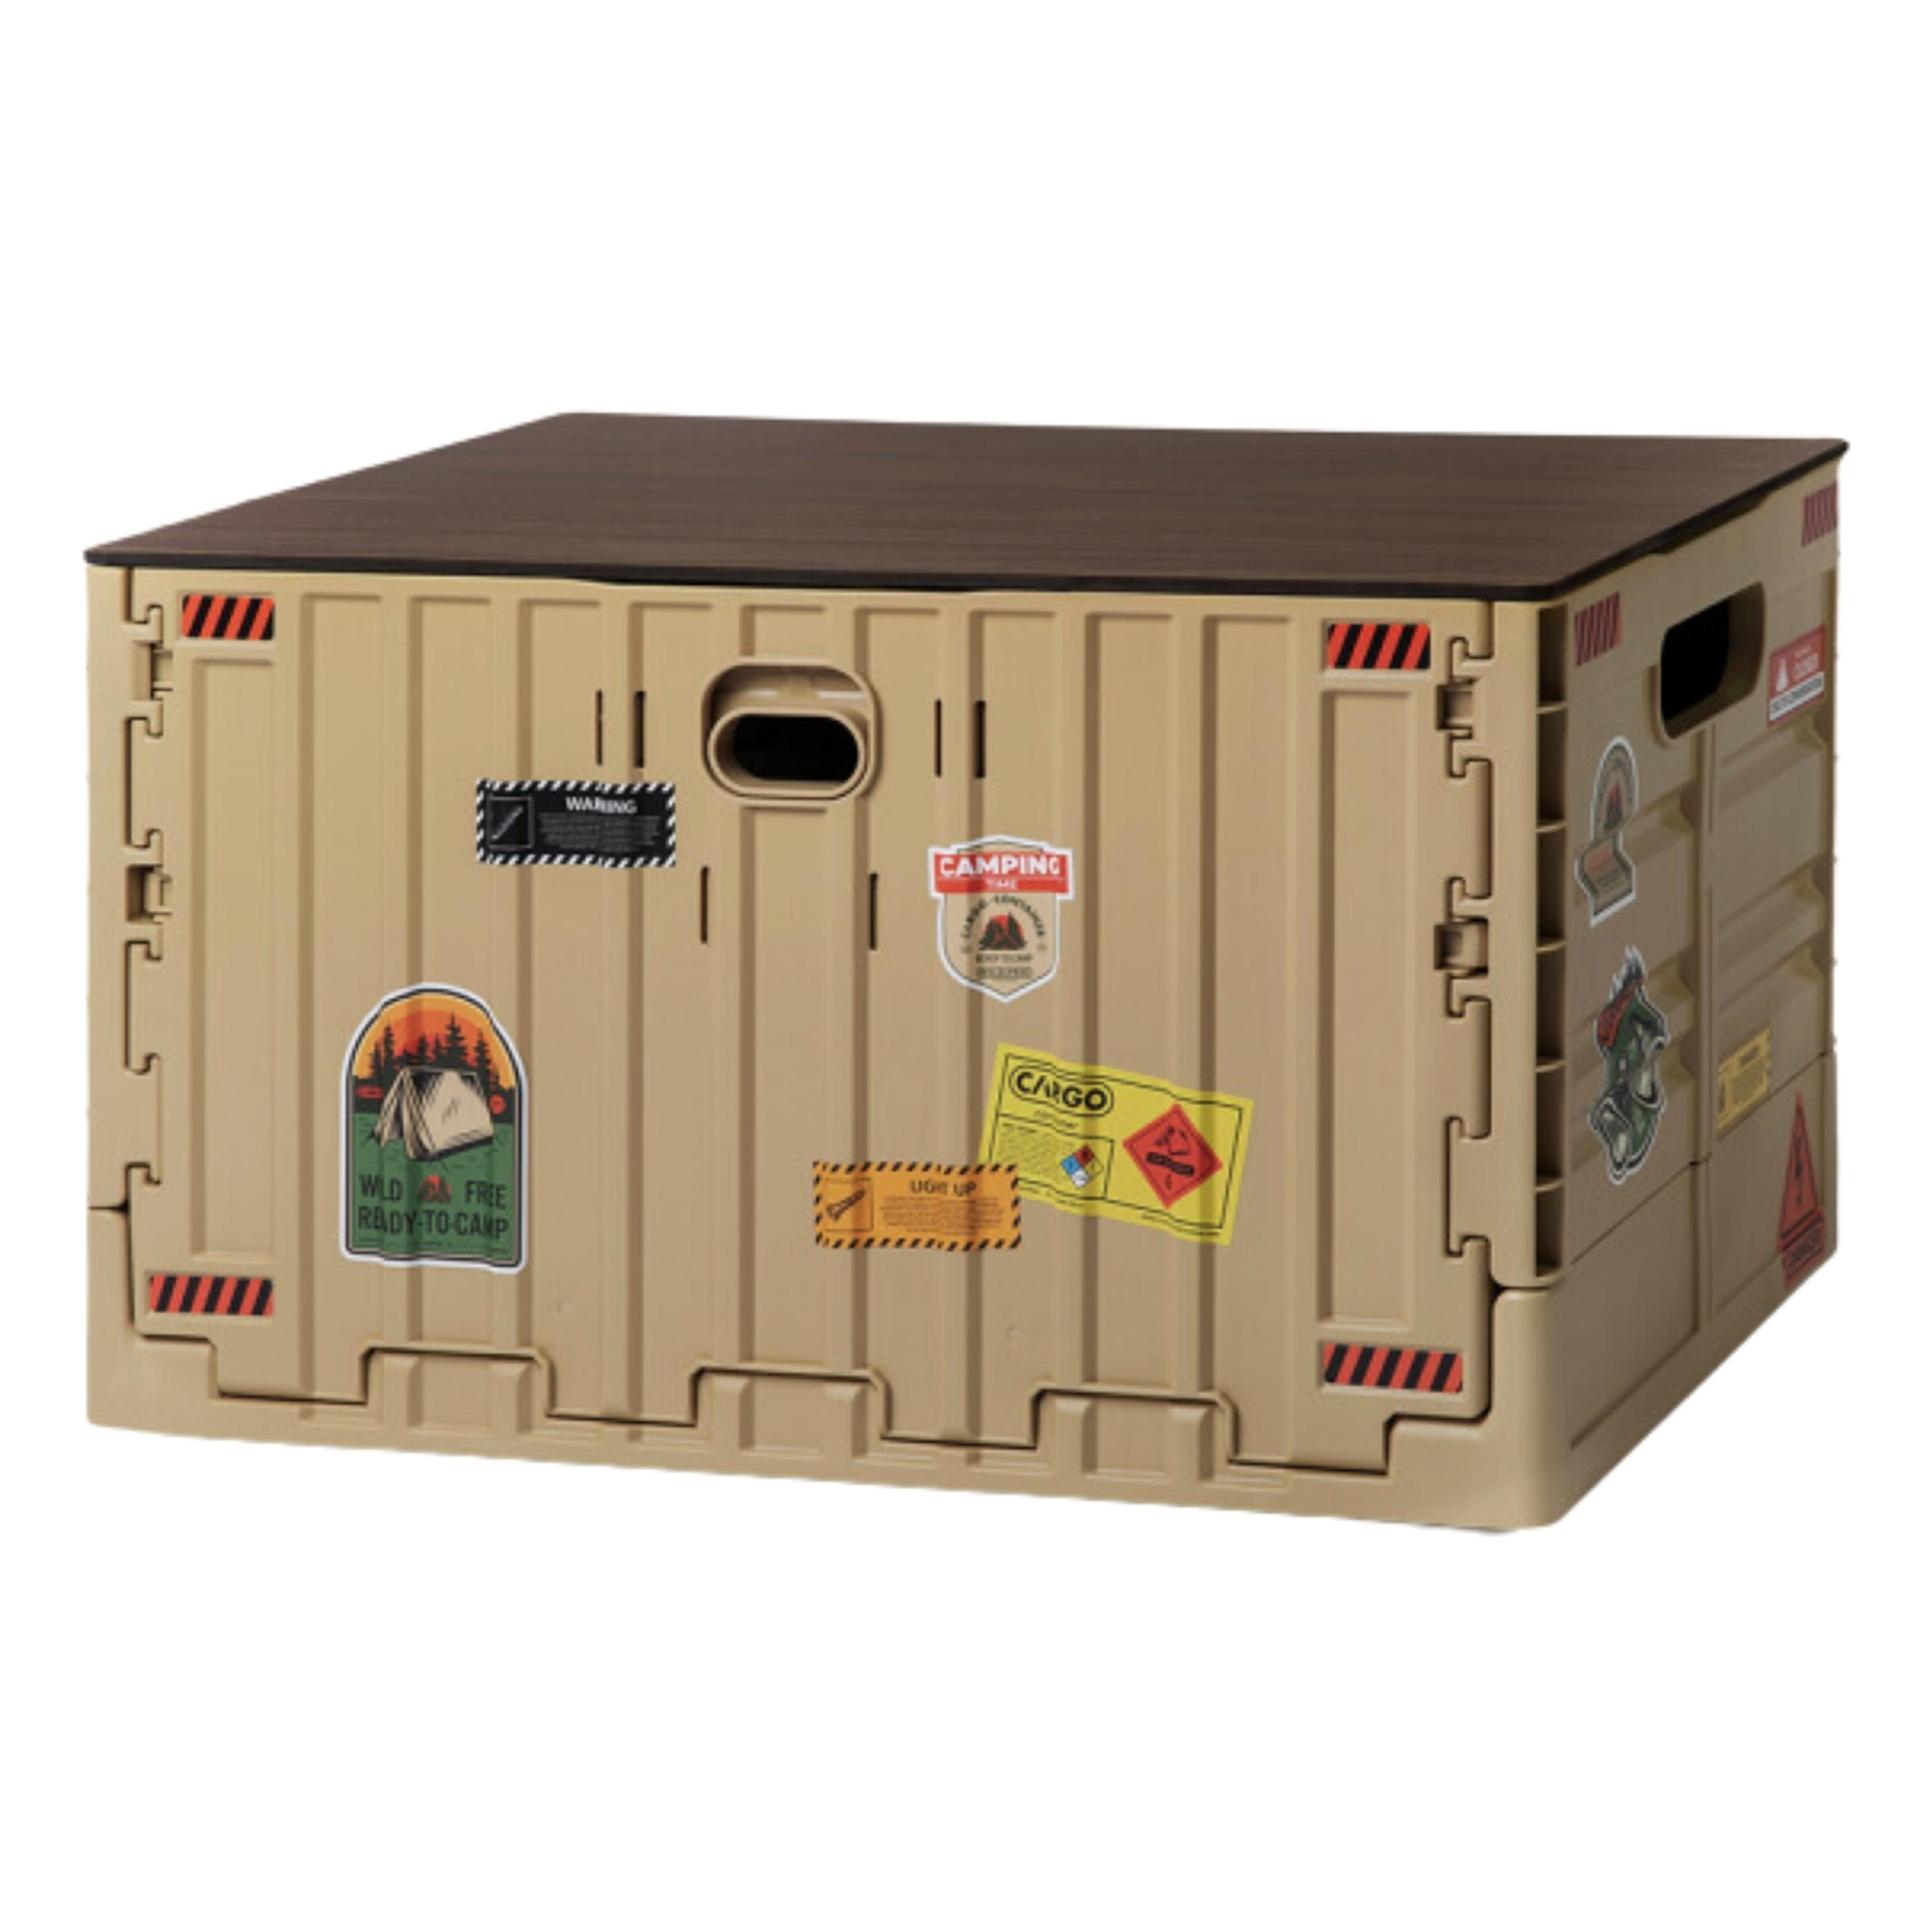 CARGO Container Signature Folding Box with Top Wooden Board